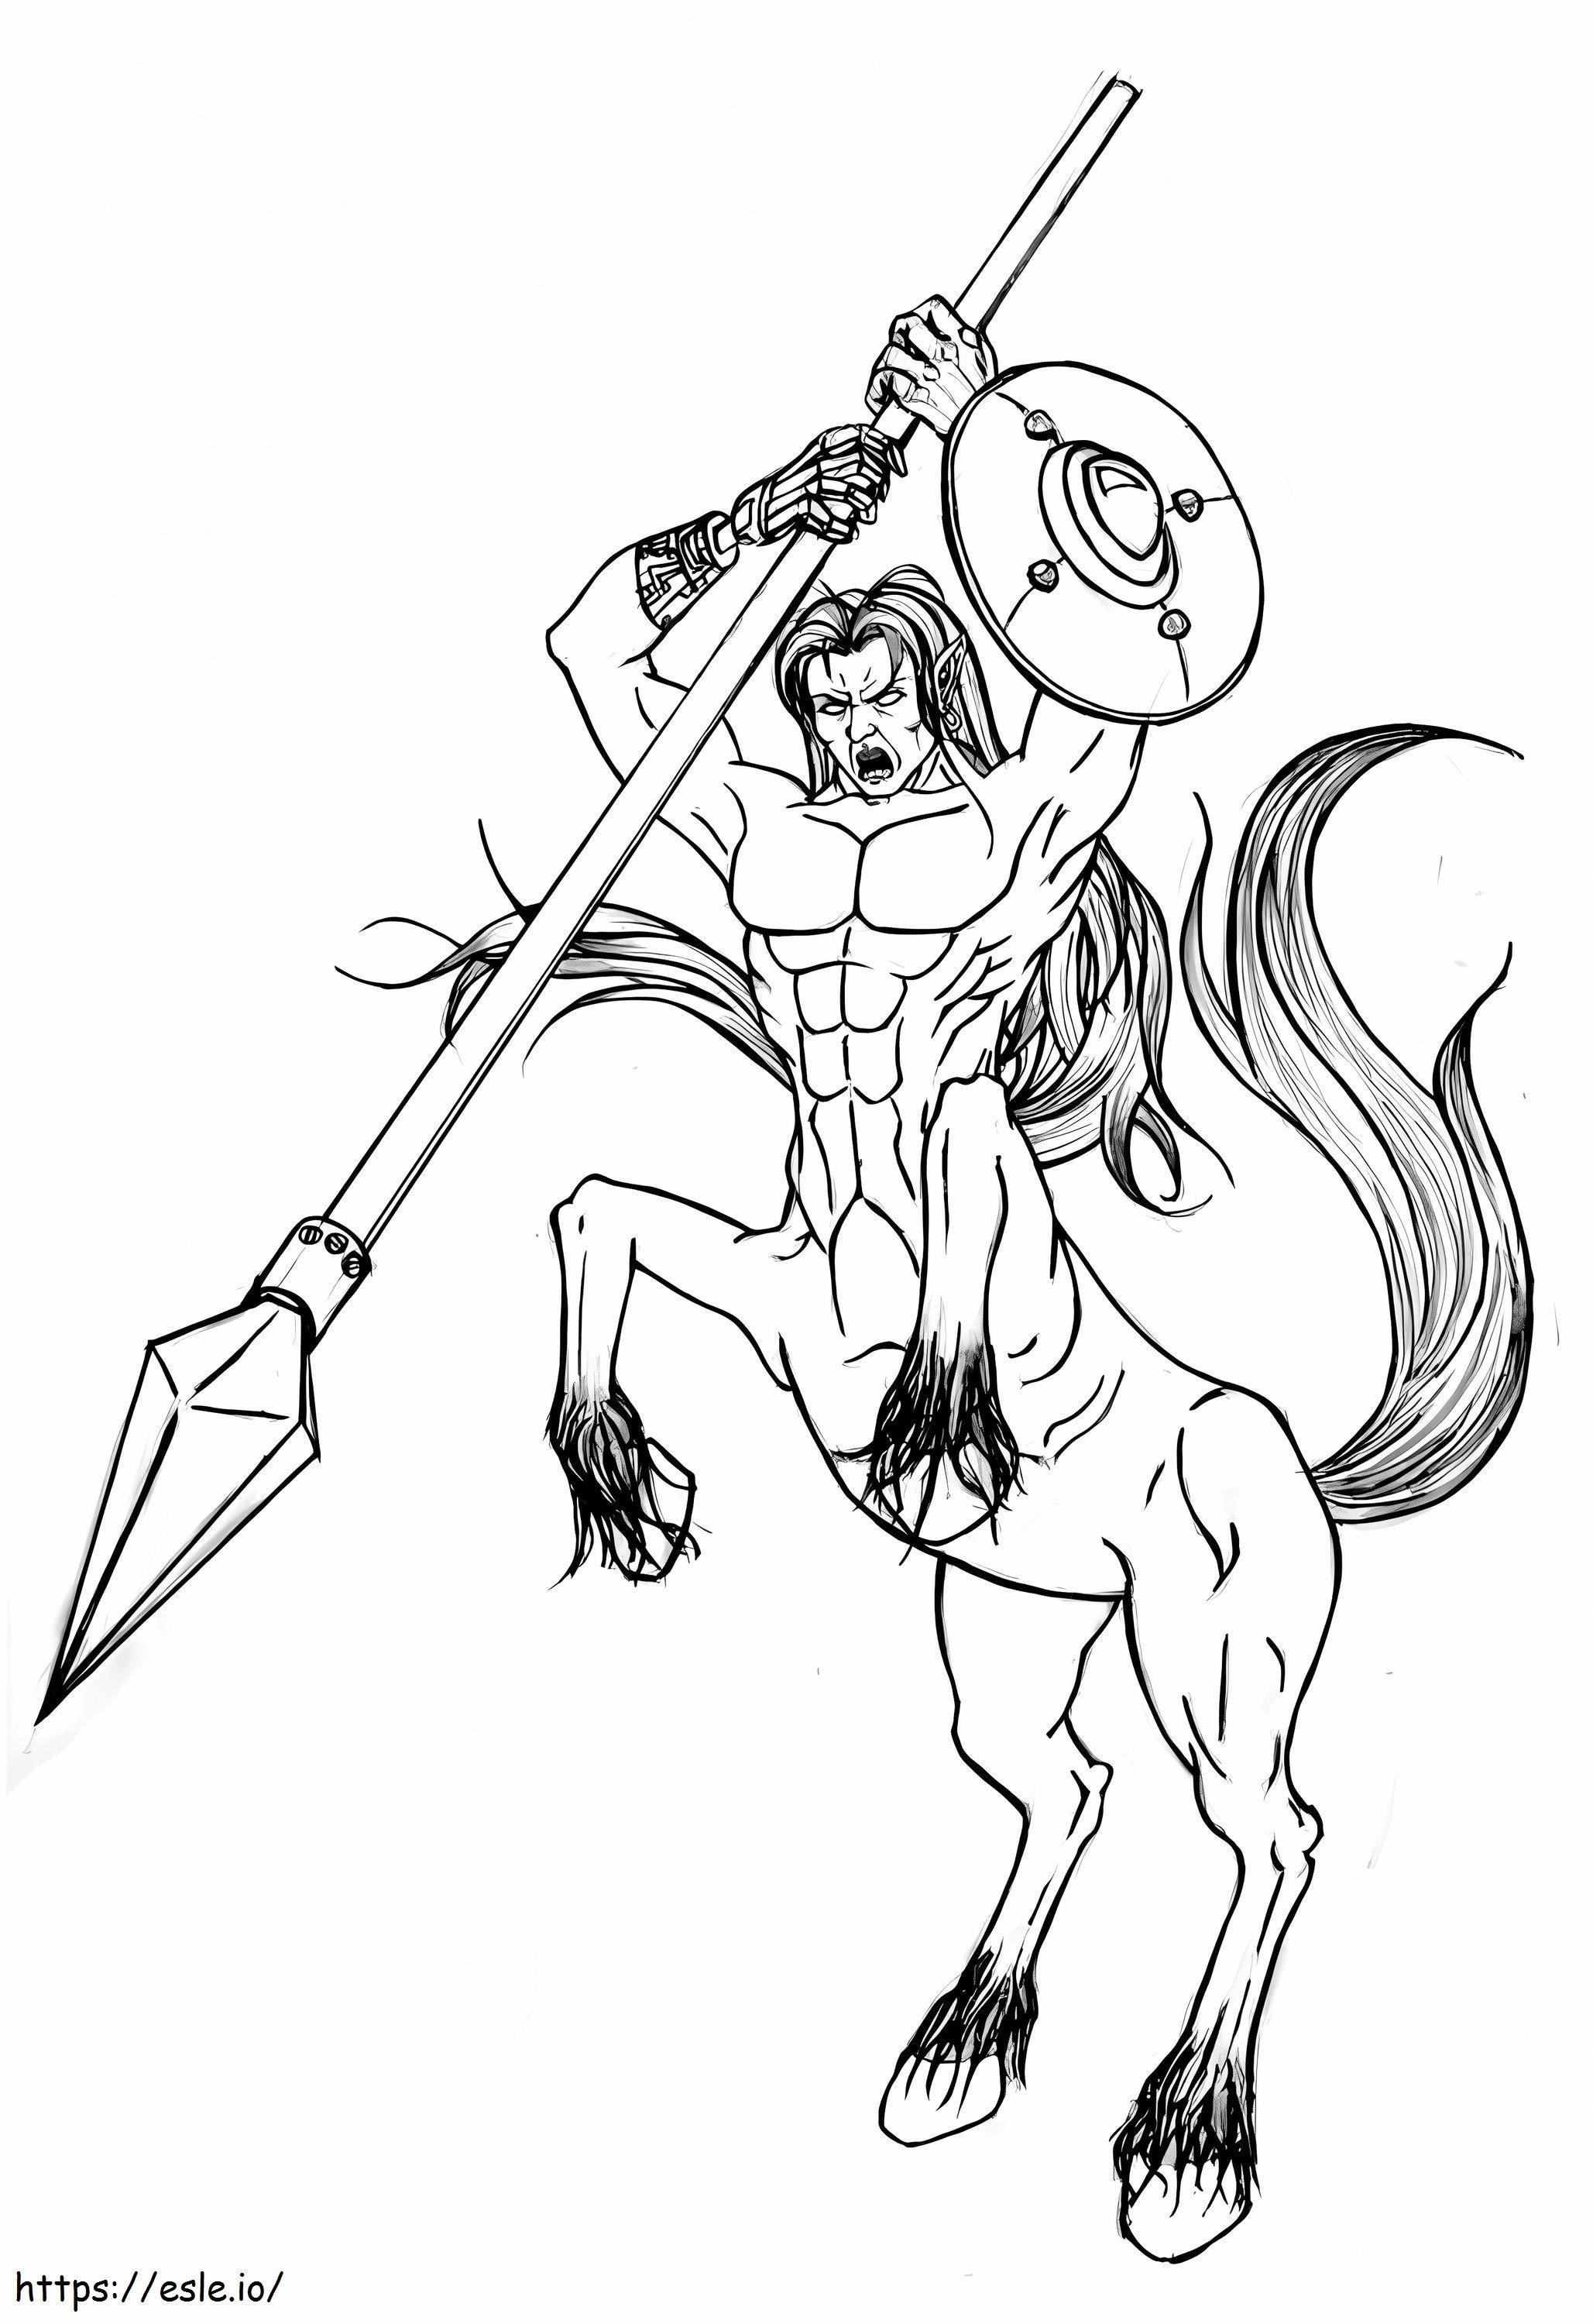 Angry Centaur coloring page